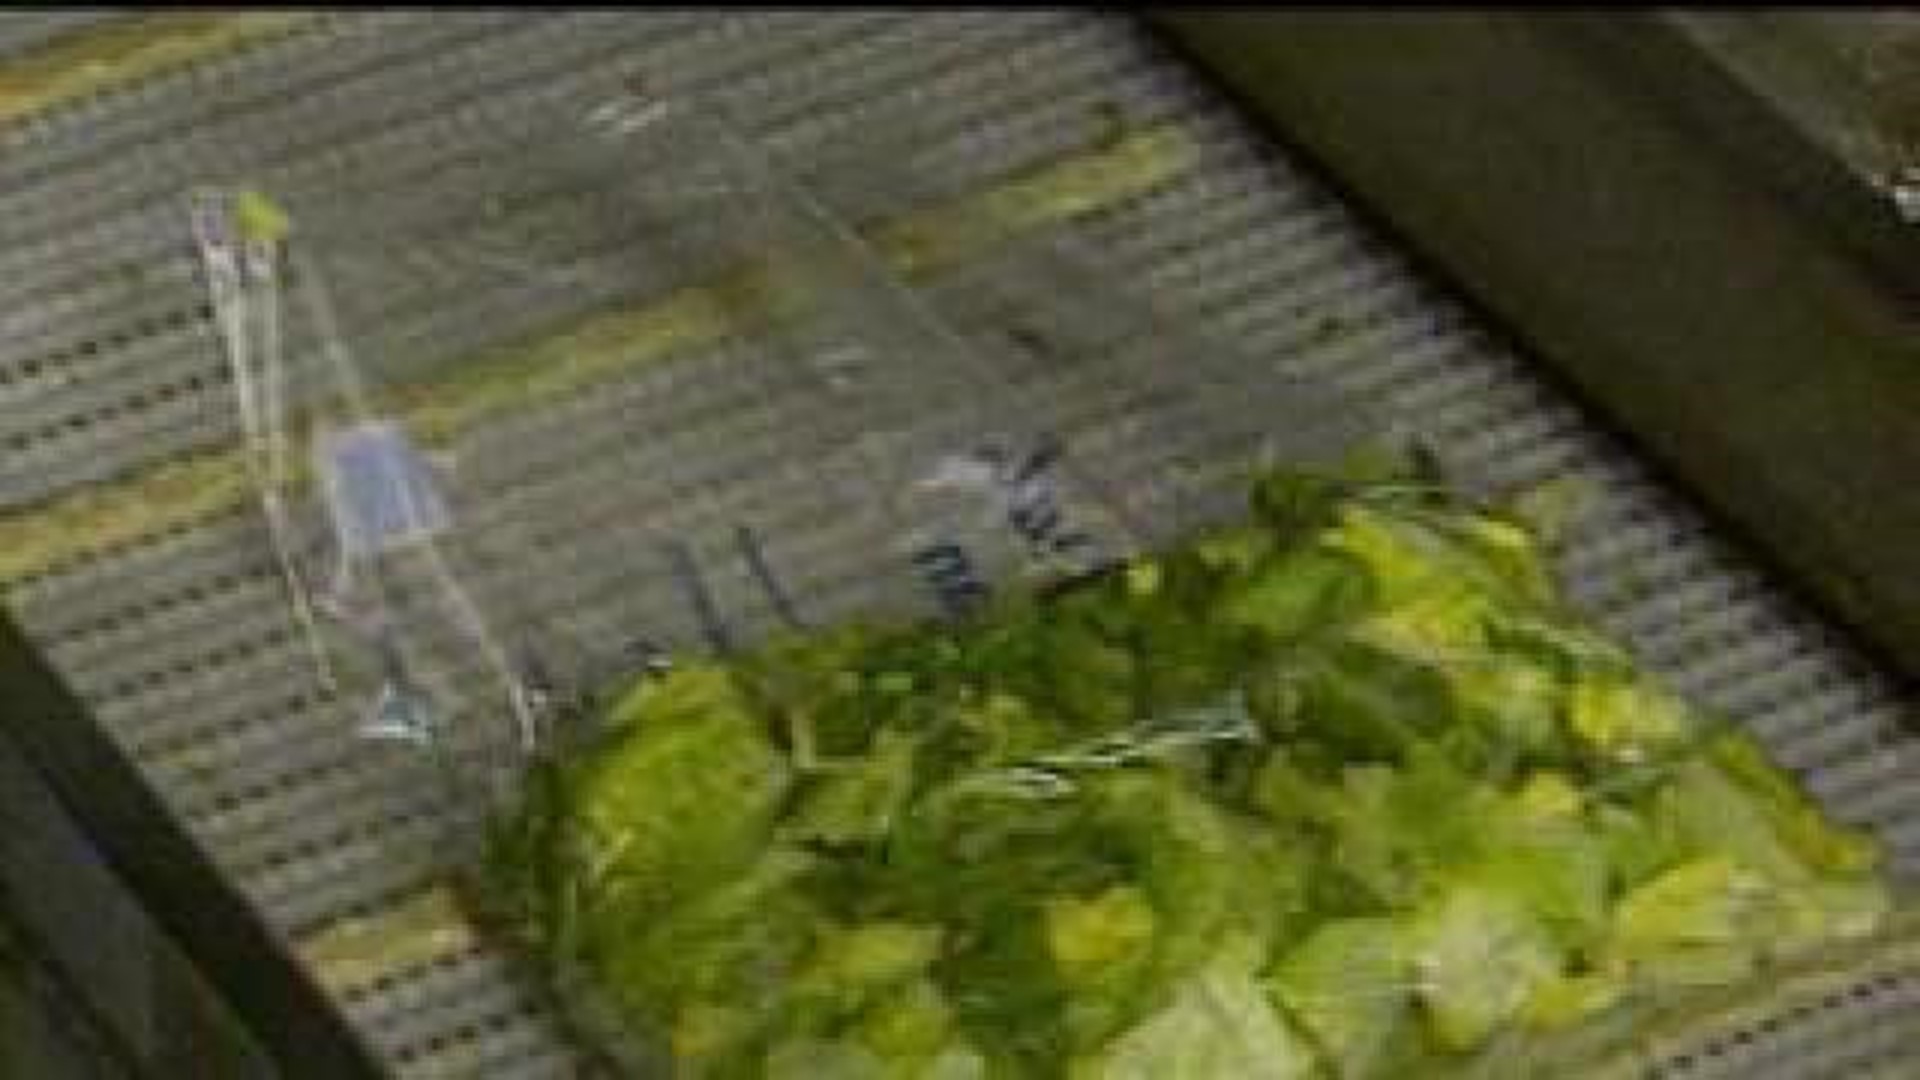 Garden-Fresh Foods issues recall of salads, slaws, dips